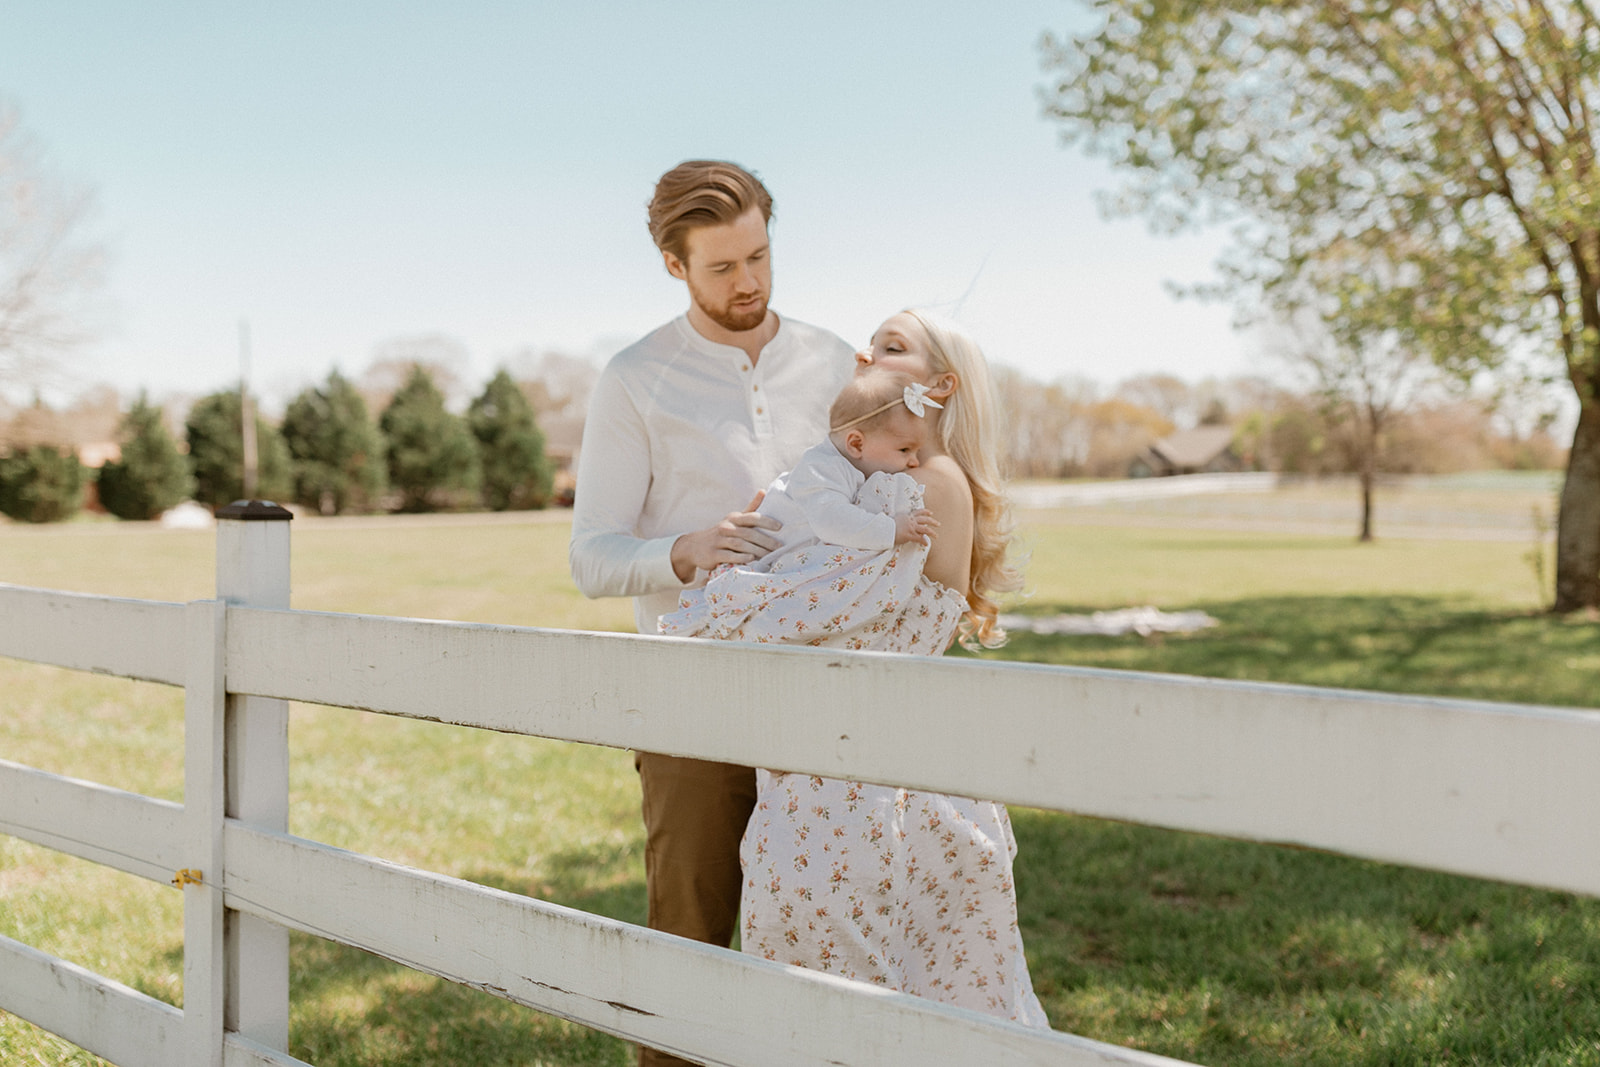 Spring Mini Sessions at O'Connor Farms in Monroe, NC.